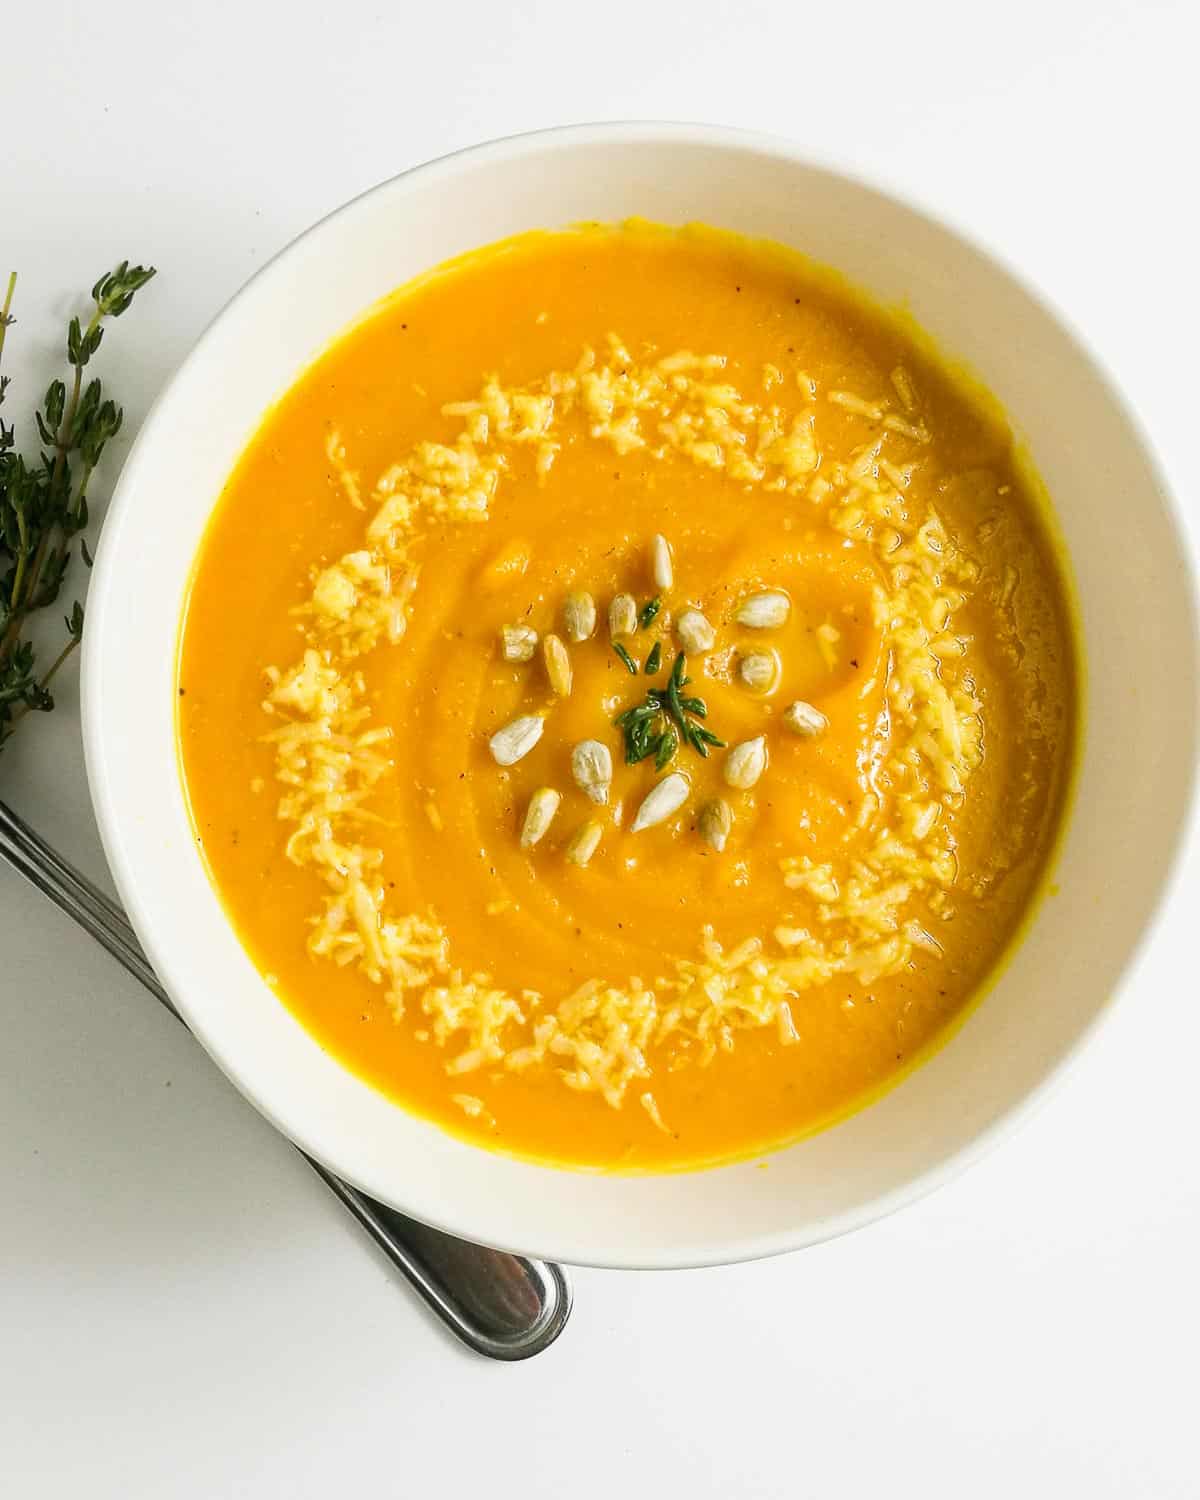 A bowl of roasted pumpkin soup without cream garnished with parmesan cheese and thyme.